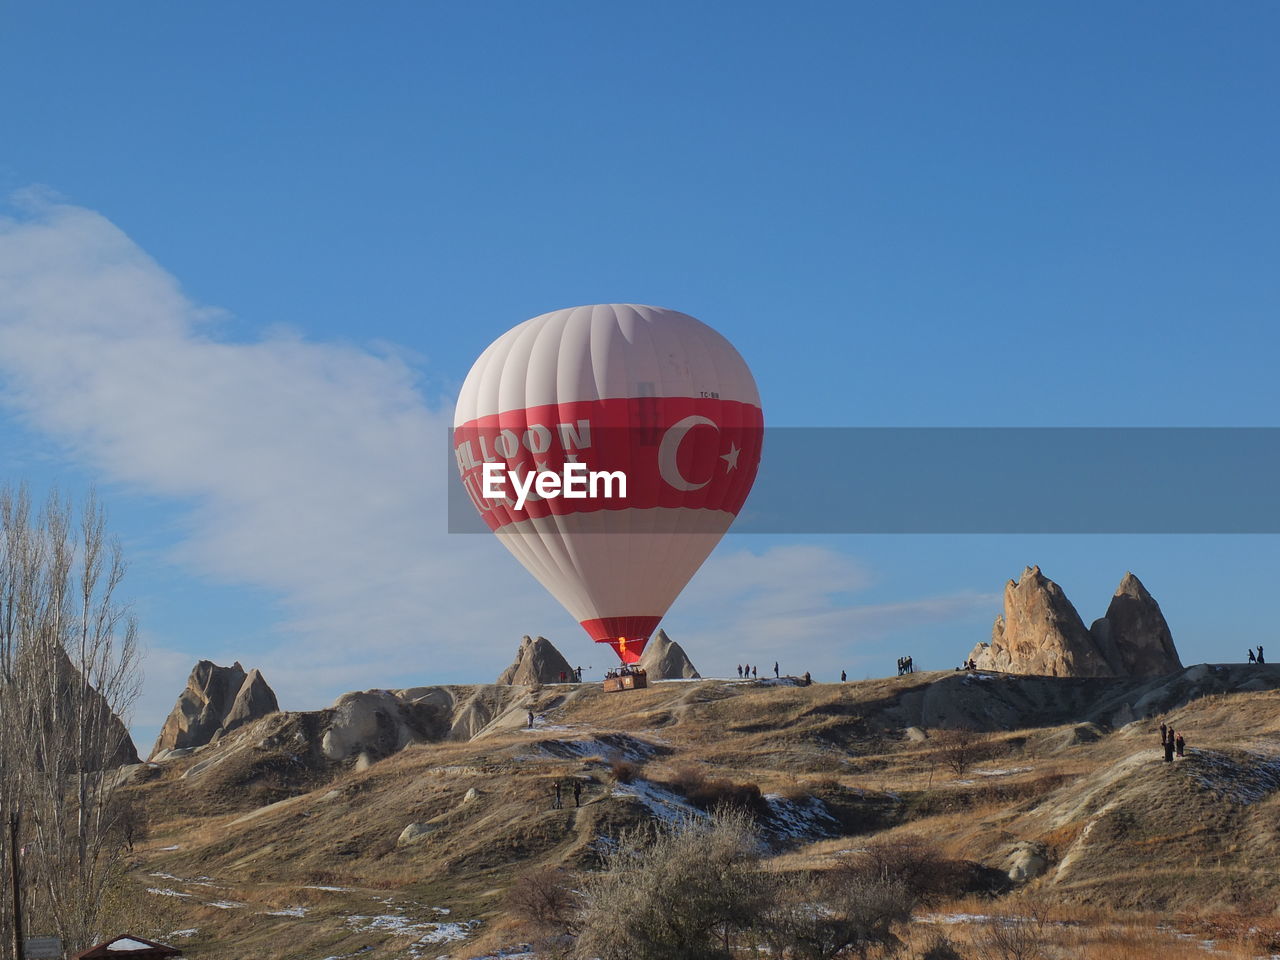 VIEW OF HOT AIR BALLOON BALLOONS ON ROCK